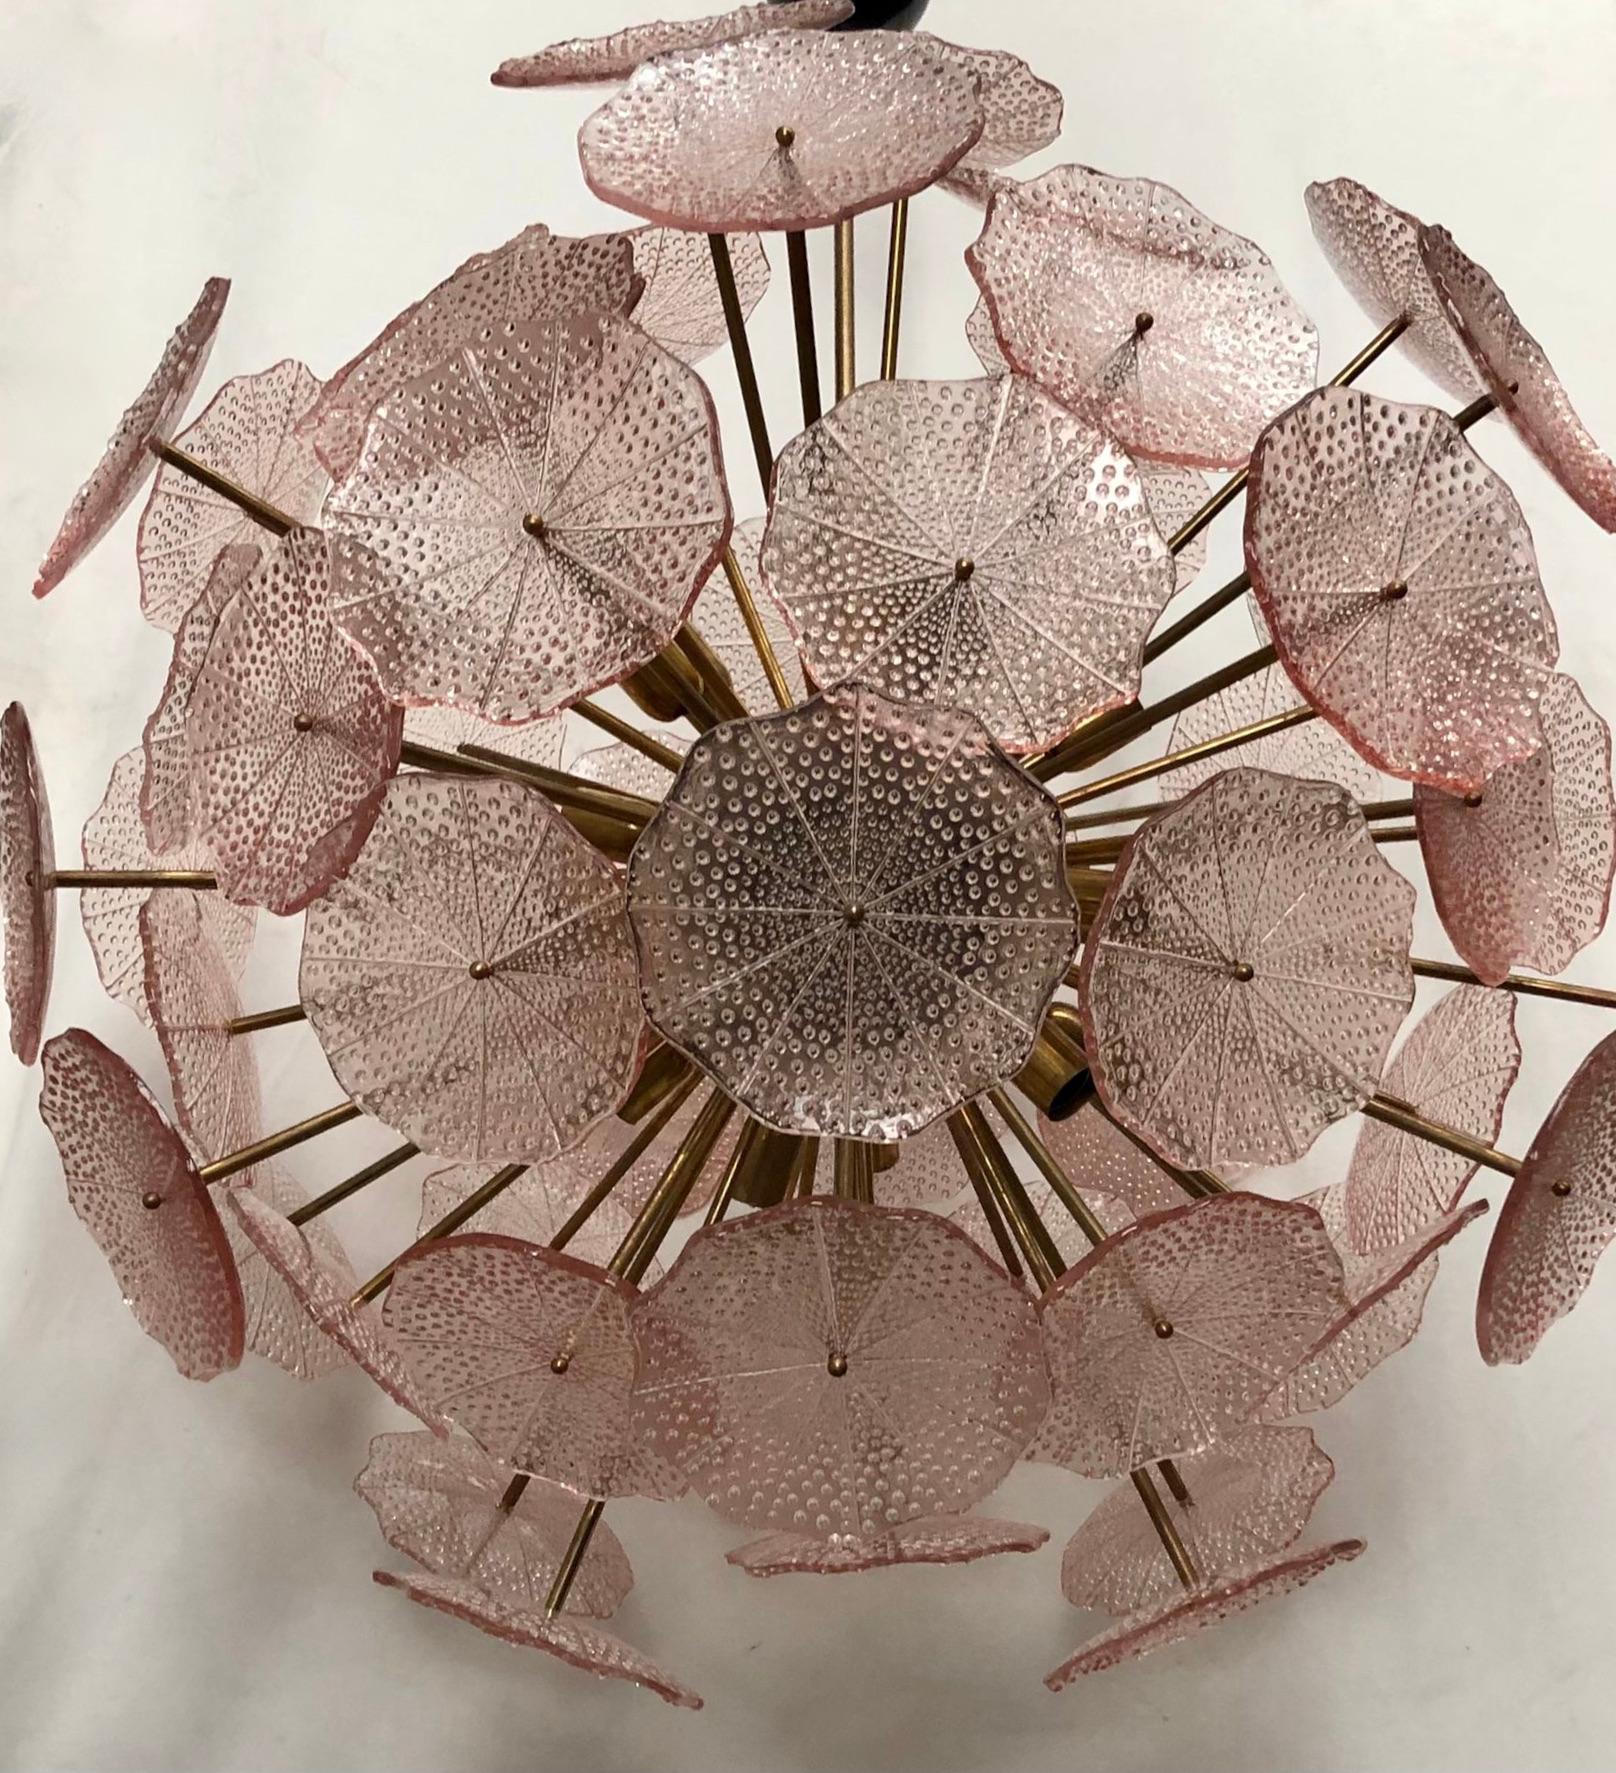 The large glass flowers make up this Murano chandelier from the 1980. A Classic Sputnik from the middle of the century.

Made of a large central sphere in which brass rods are screwed, glass leaves are placed above the brass rods. It has 18-light